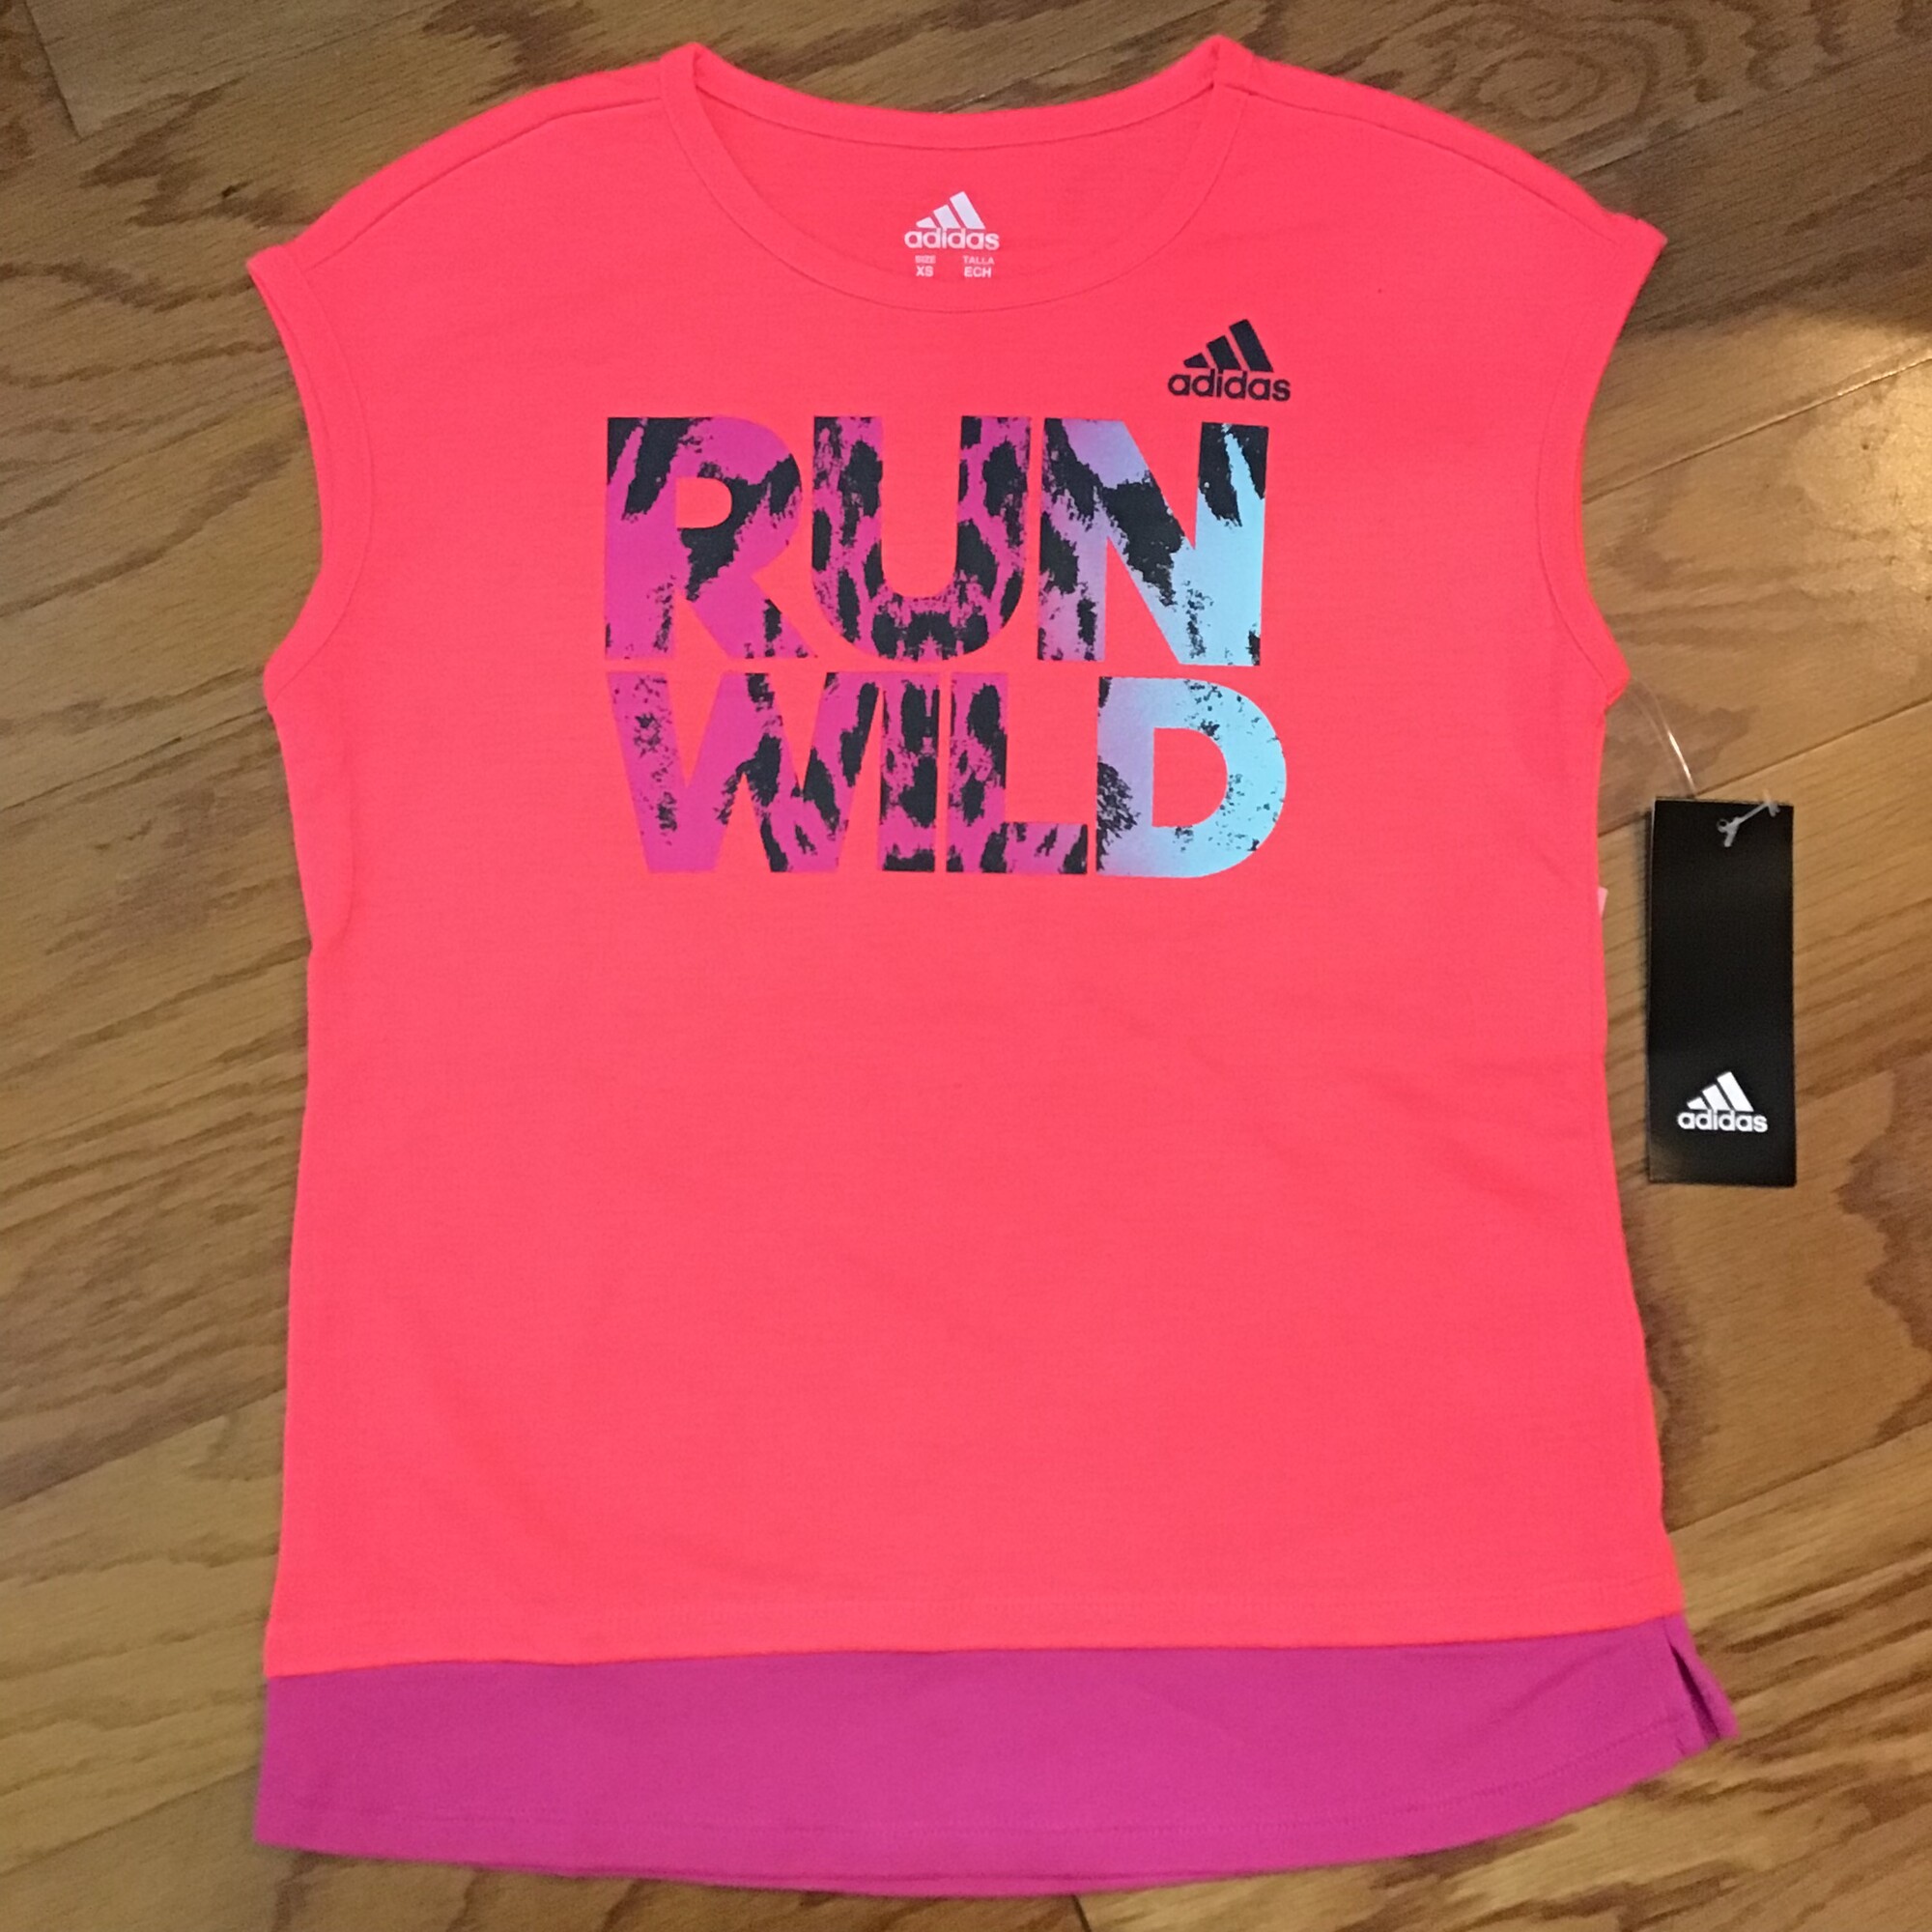 Adidas Shirt NEW, Neon, Size: 10-12

brand new with tag

ALL ONLINE SALES ARE FINAL.
NO RETURNS
REFUNDS
OR EXCHANGES

PLEASE ALLOW AT LEAST 1 WEEK FOR SHIPMENT. THANK YOU FOR SHOPPING SMALL!